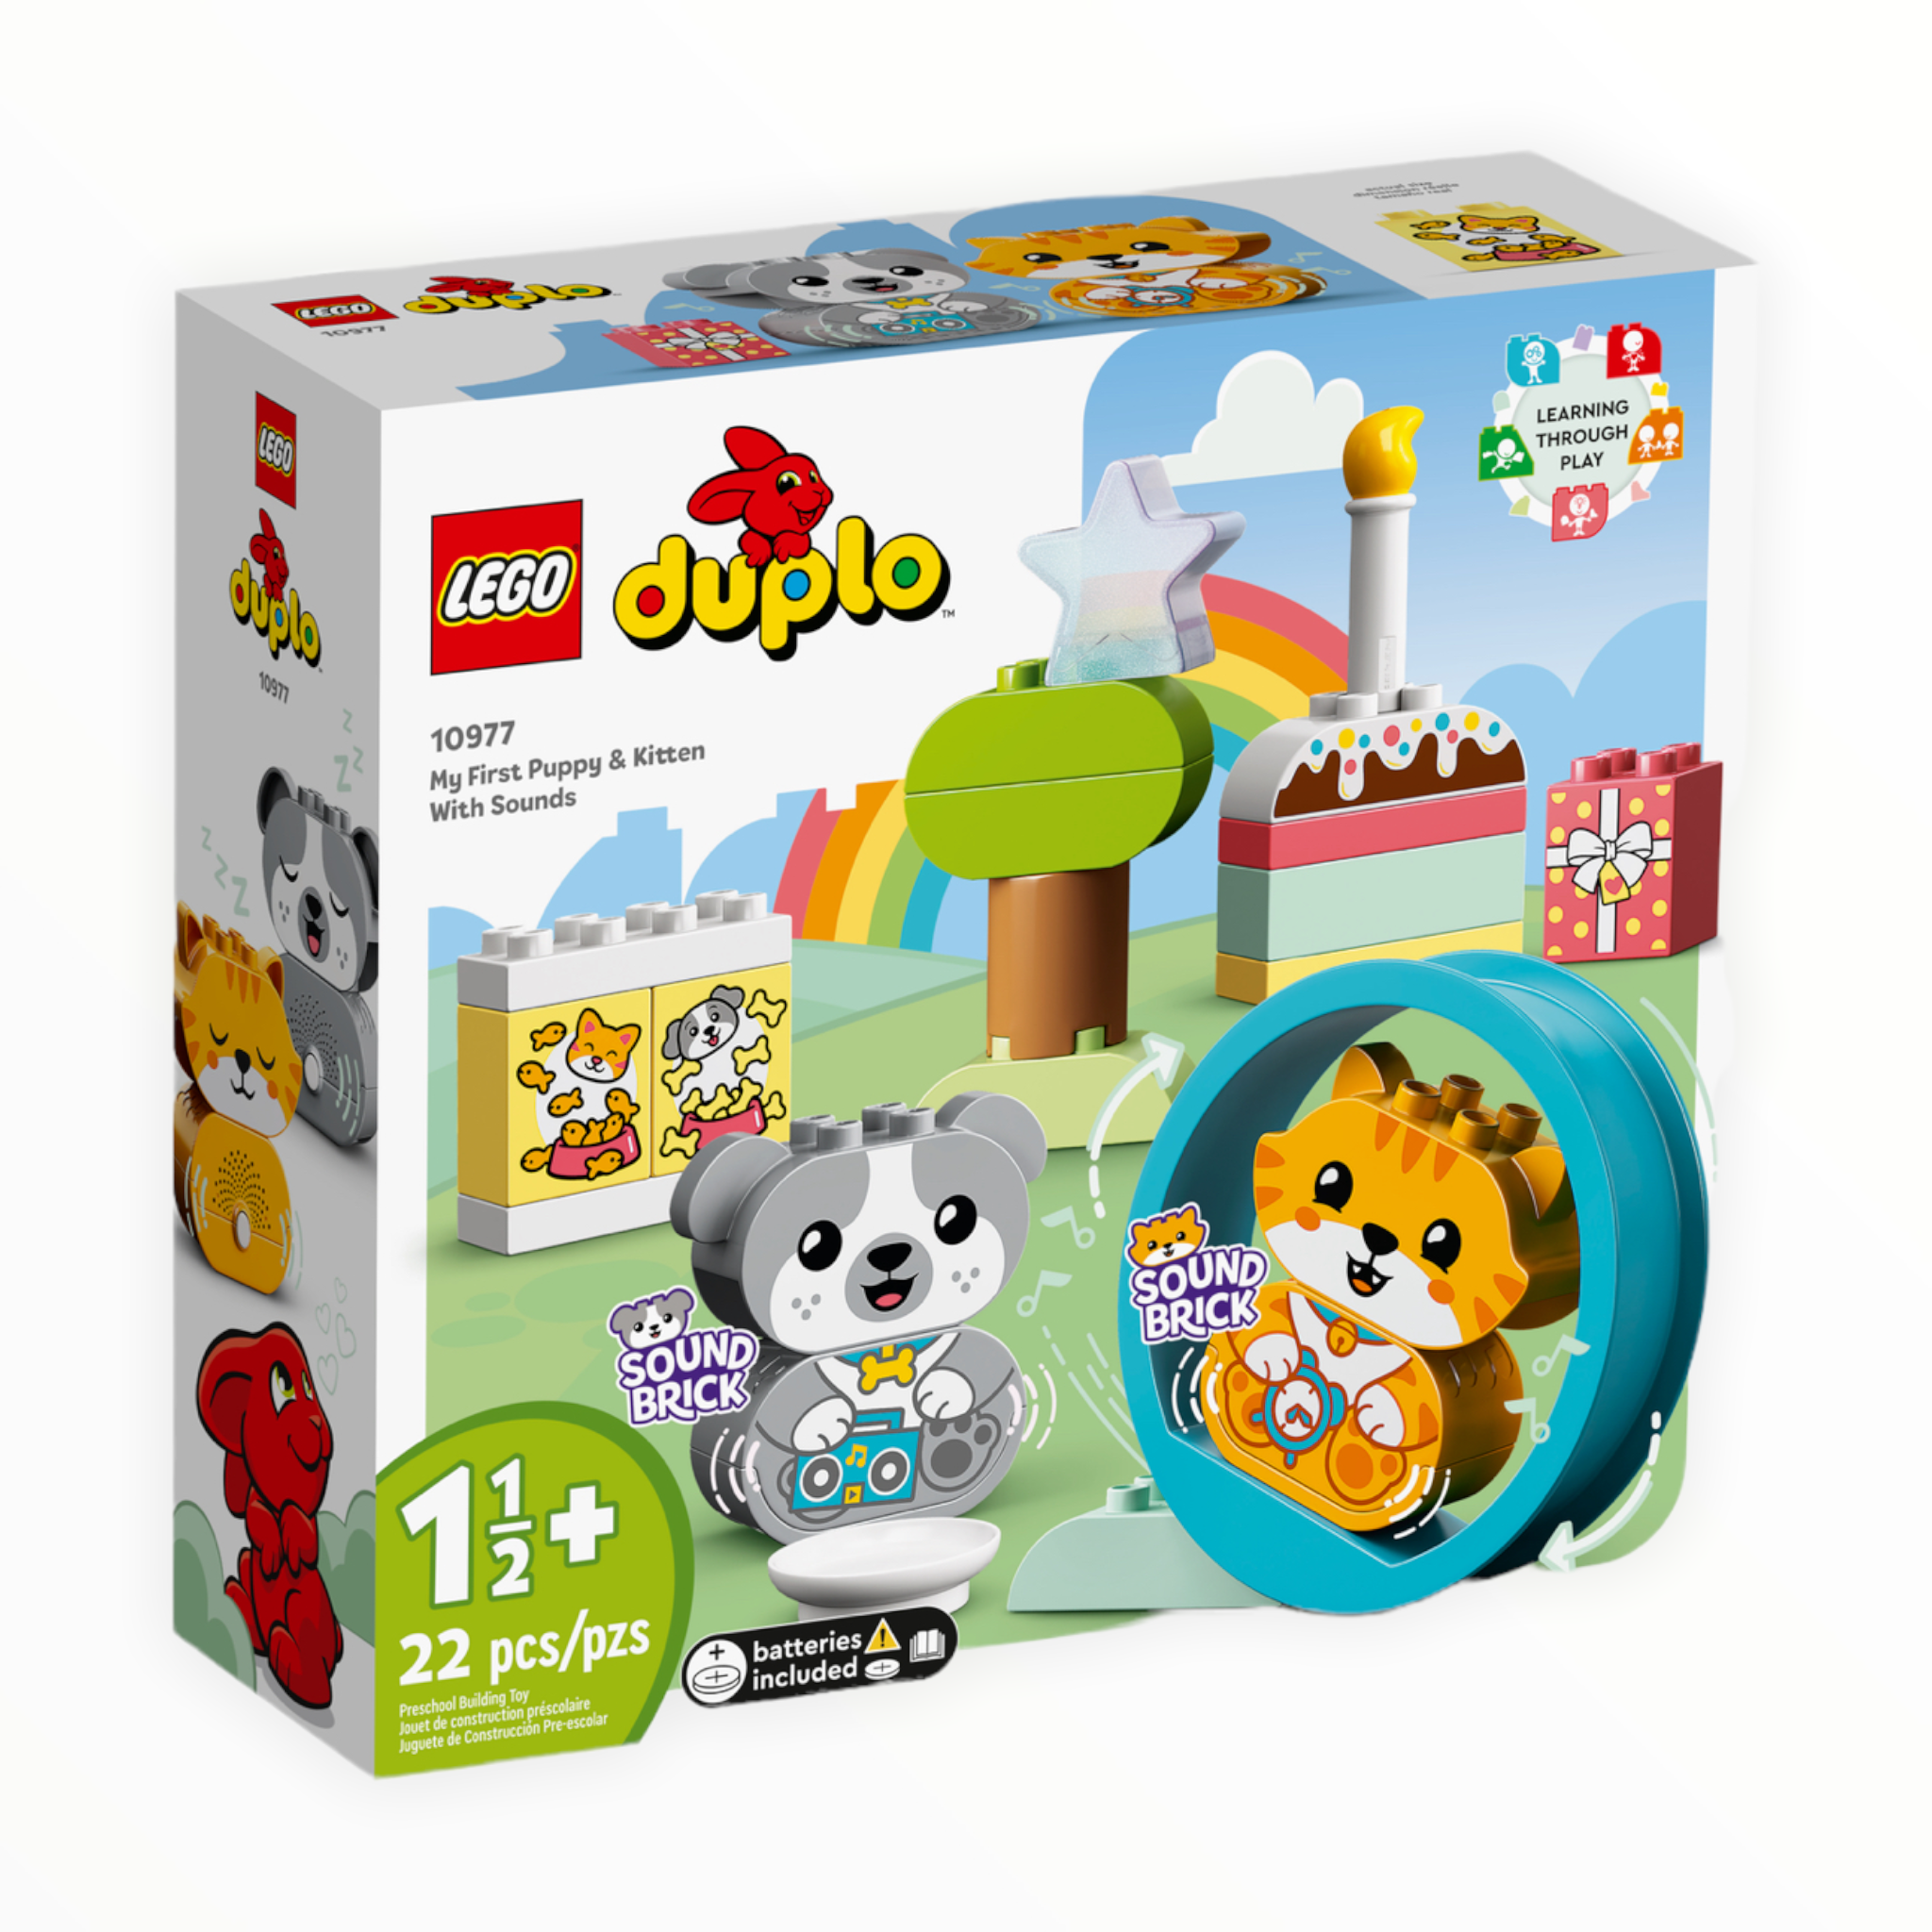 10977 DUPLO My First Puppy & Kitten With Sounds